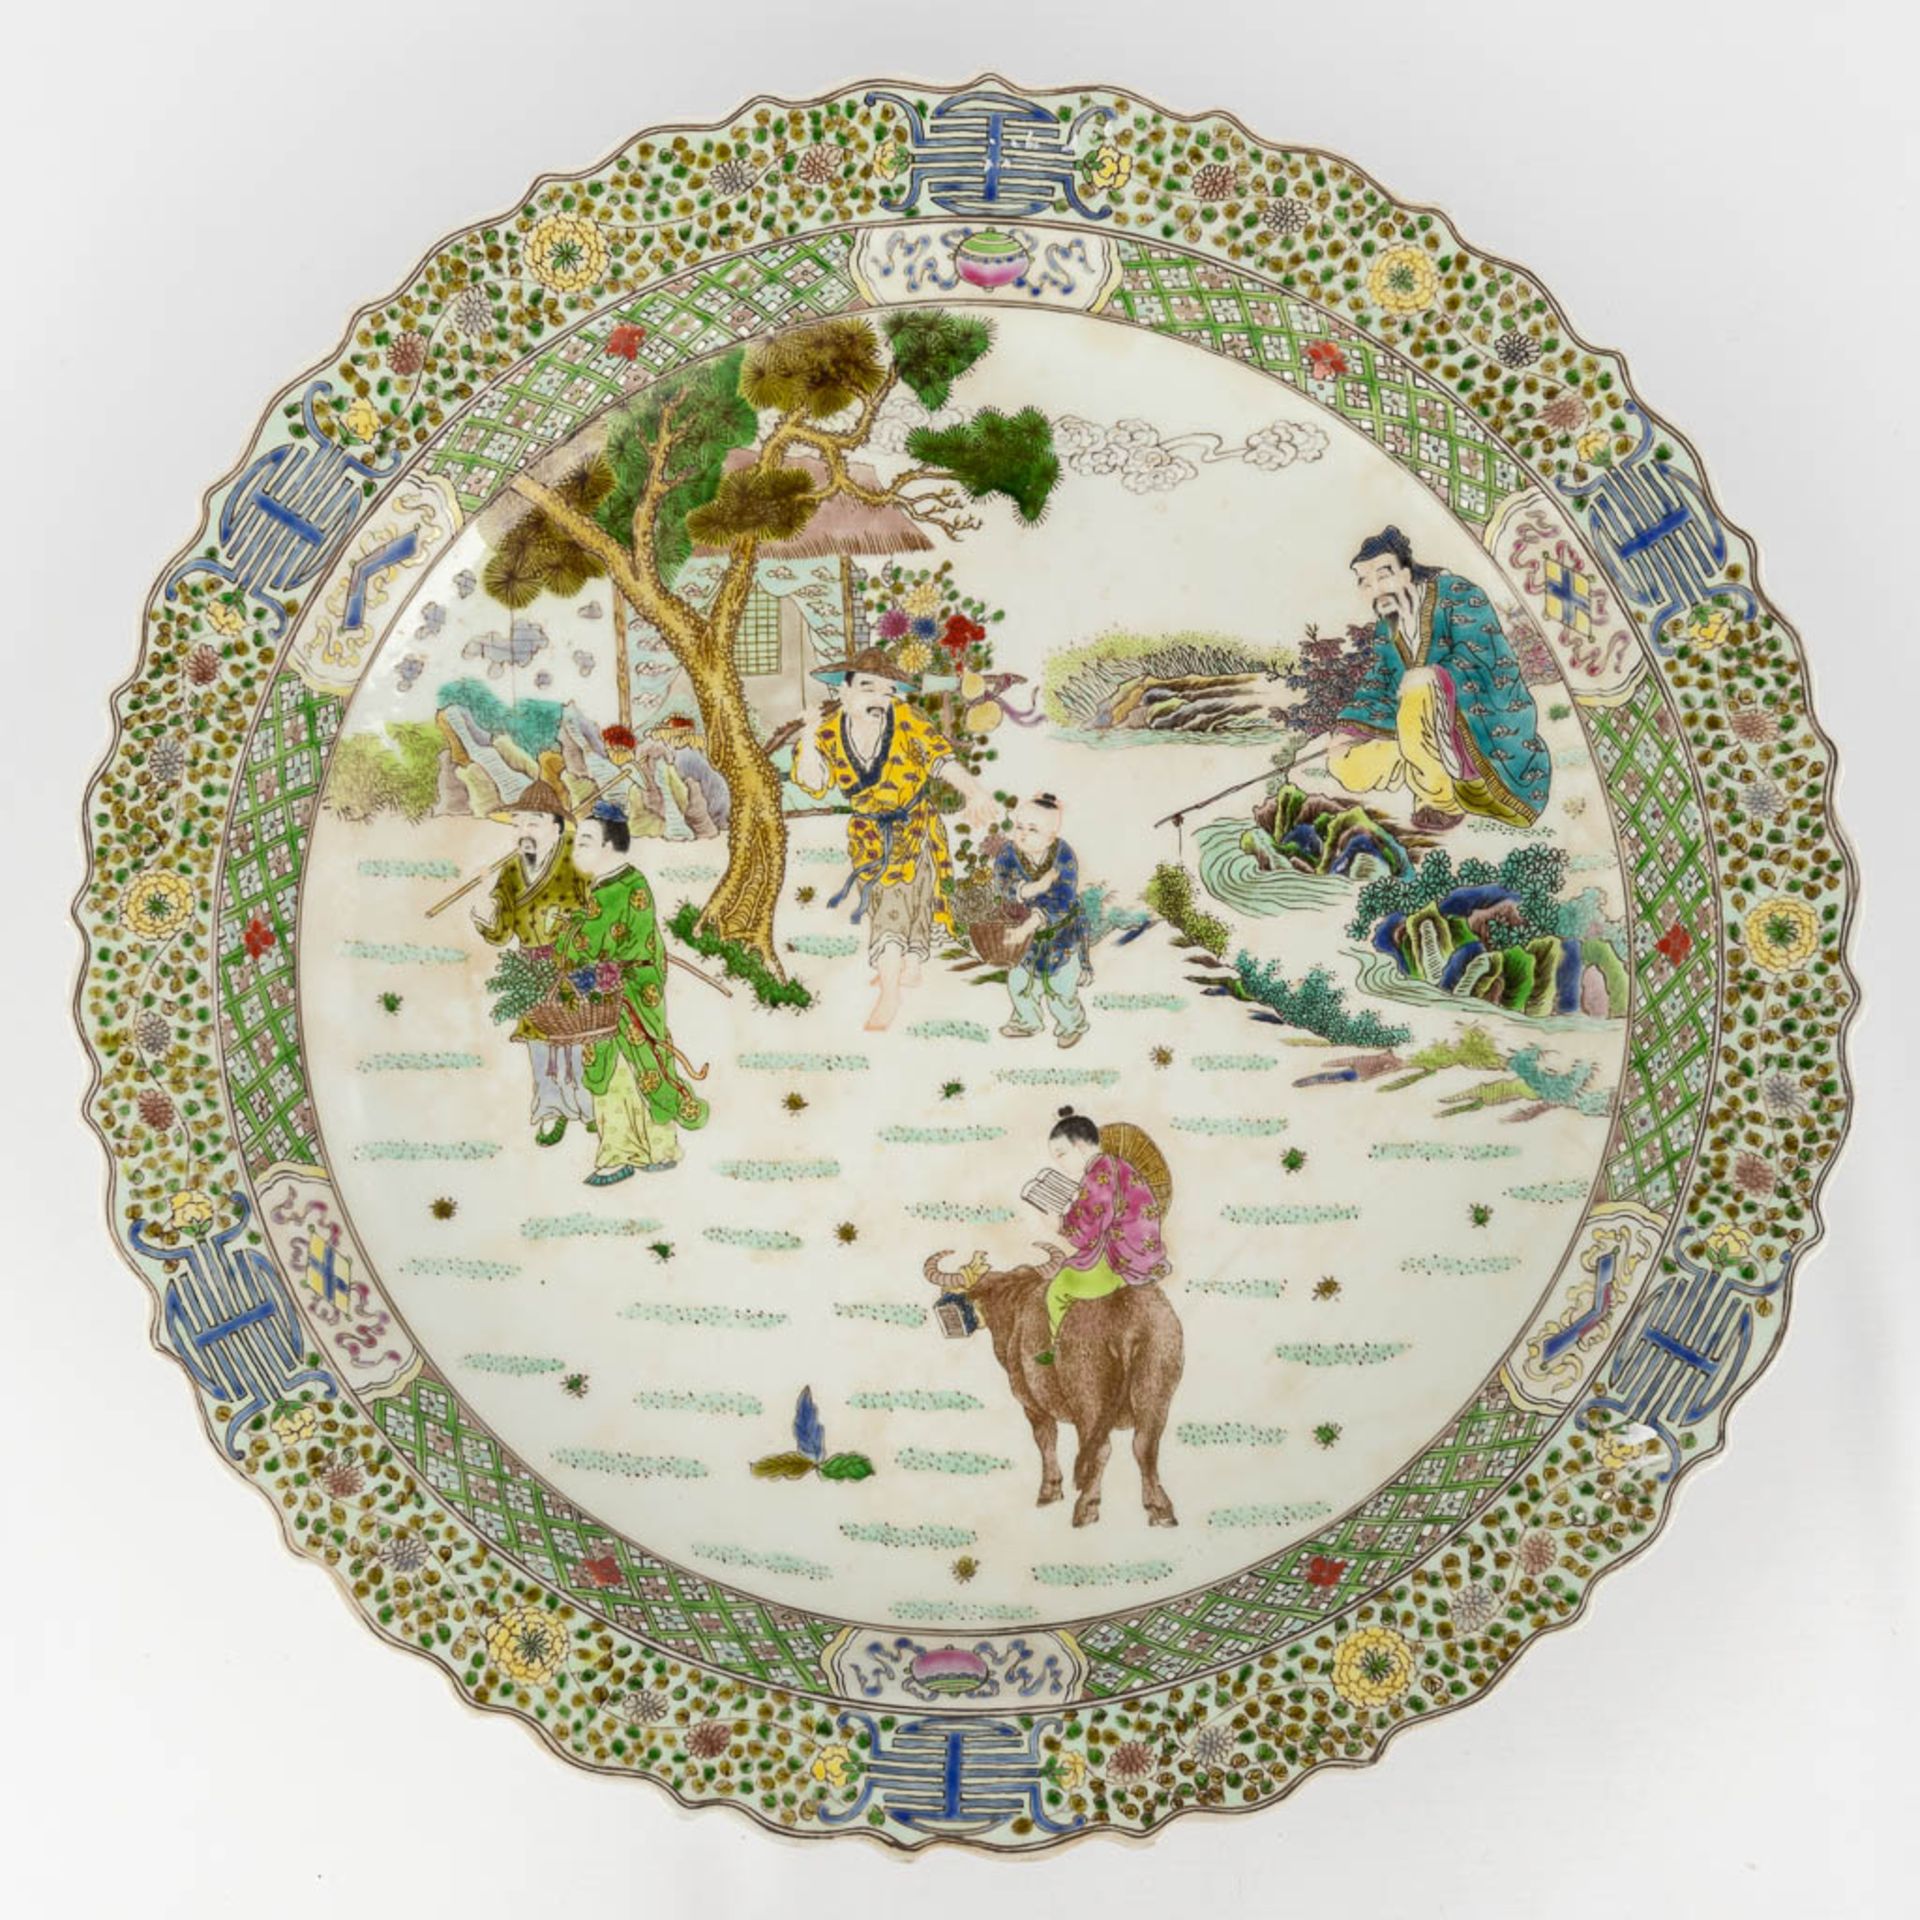 A Chinese plate 'Famille Verte' decorated with Chinese figurines. 20th C. Kangxi mark. (D: 45 cm)